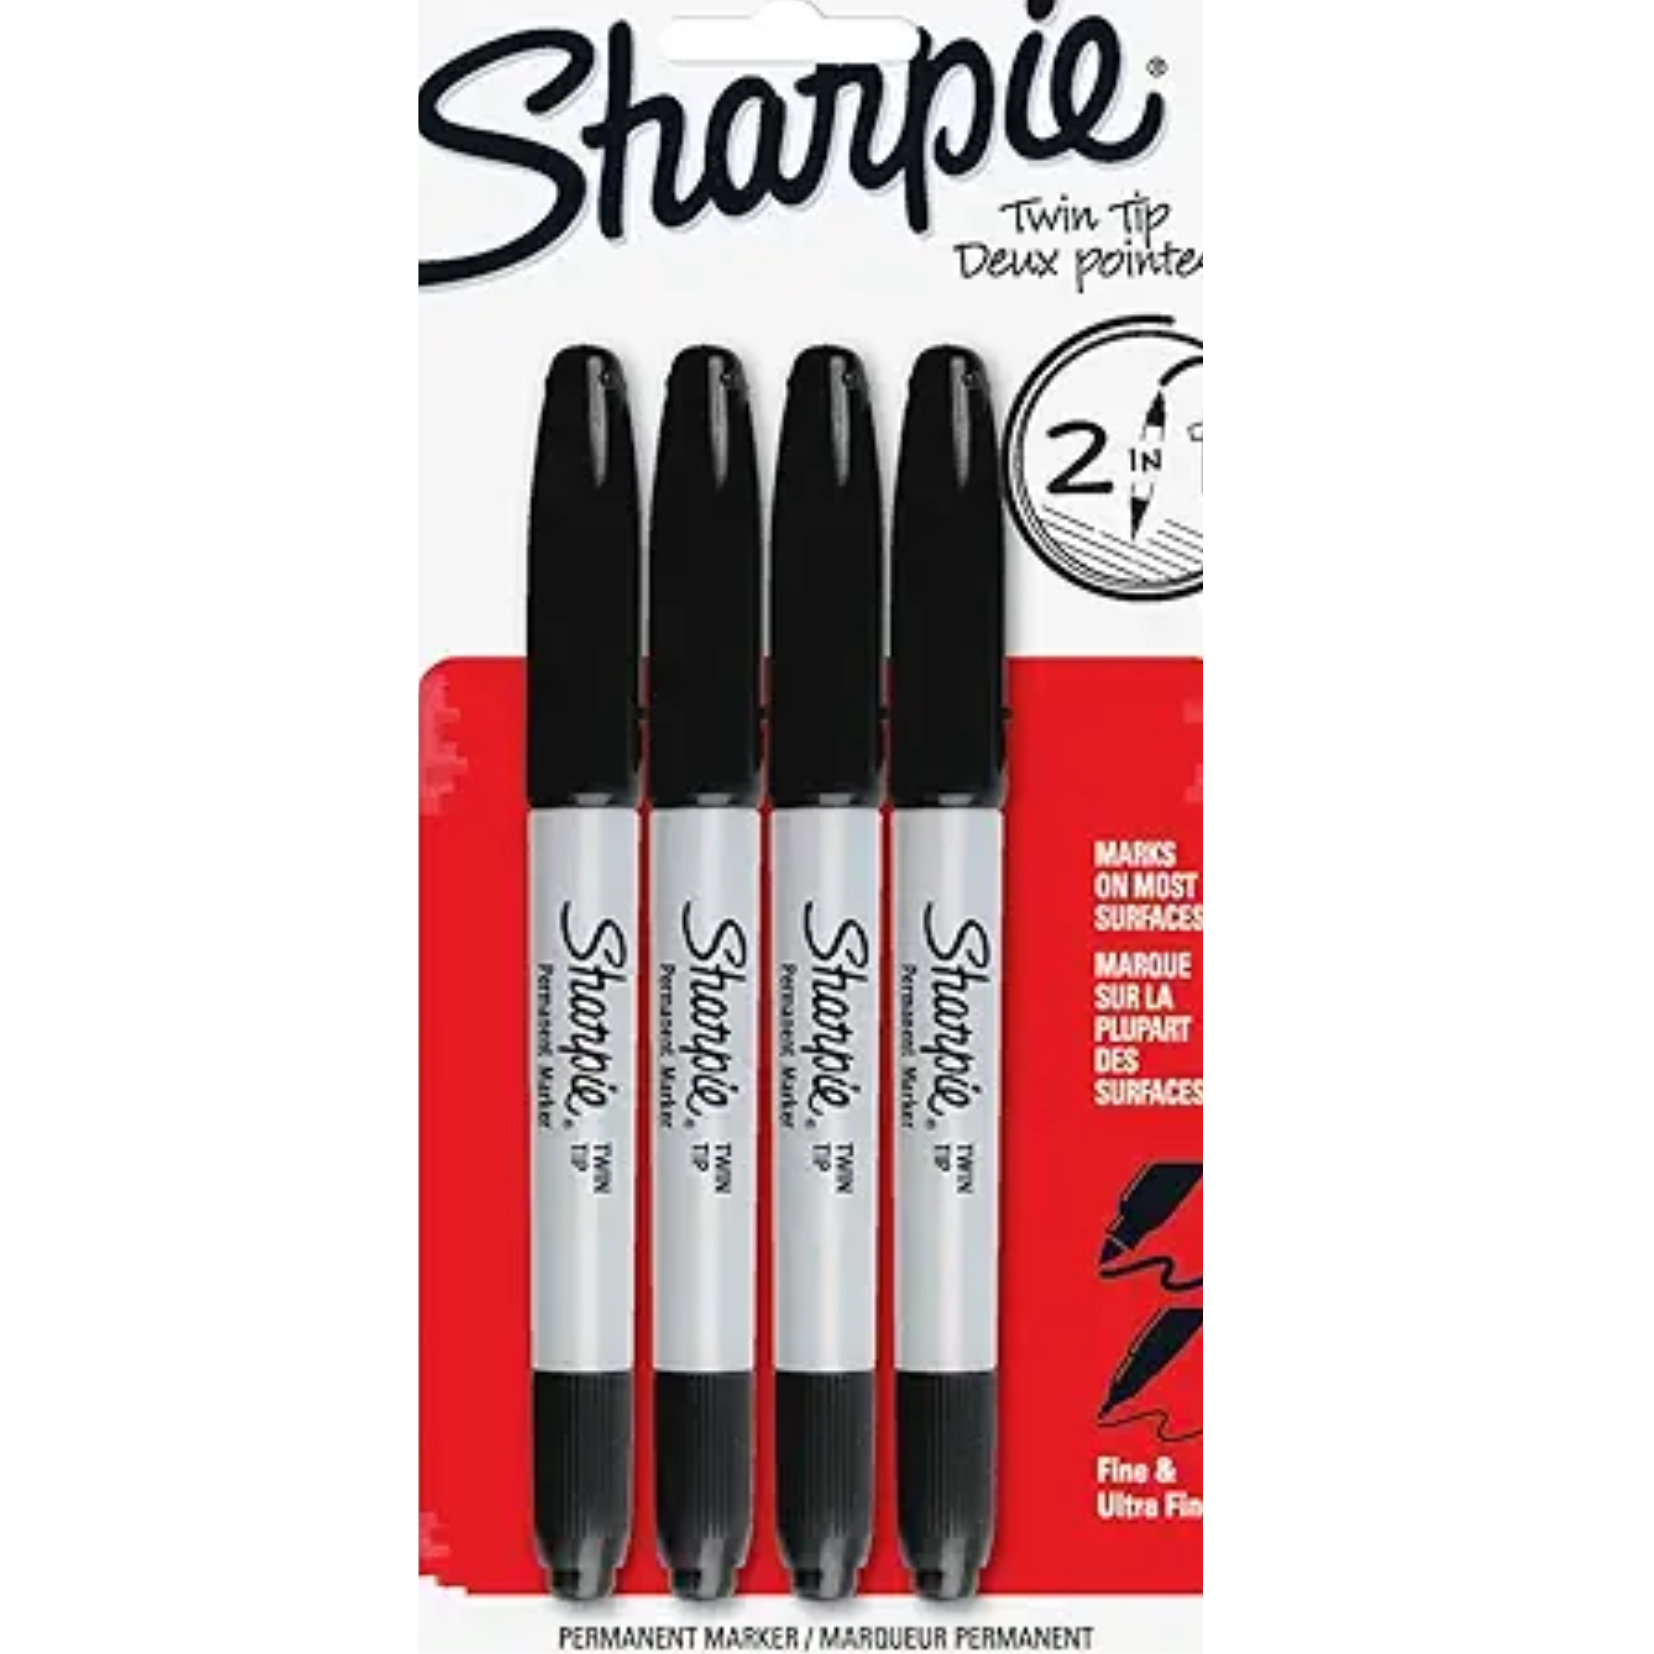 Sharpie Twin-Tip Permanent Markers 4pk